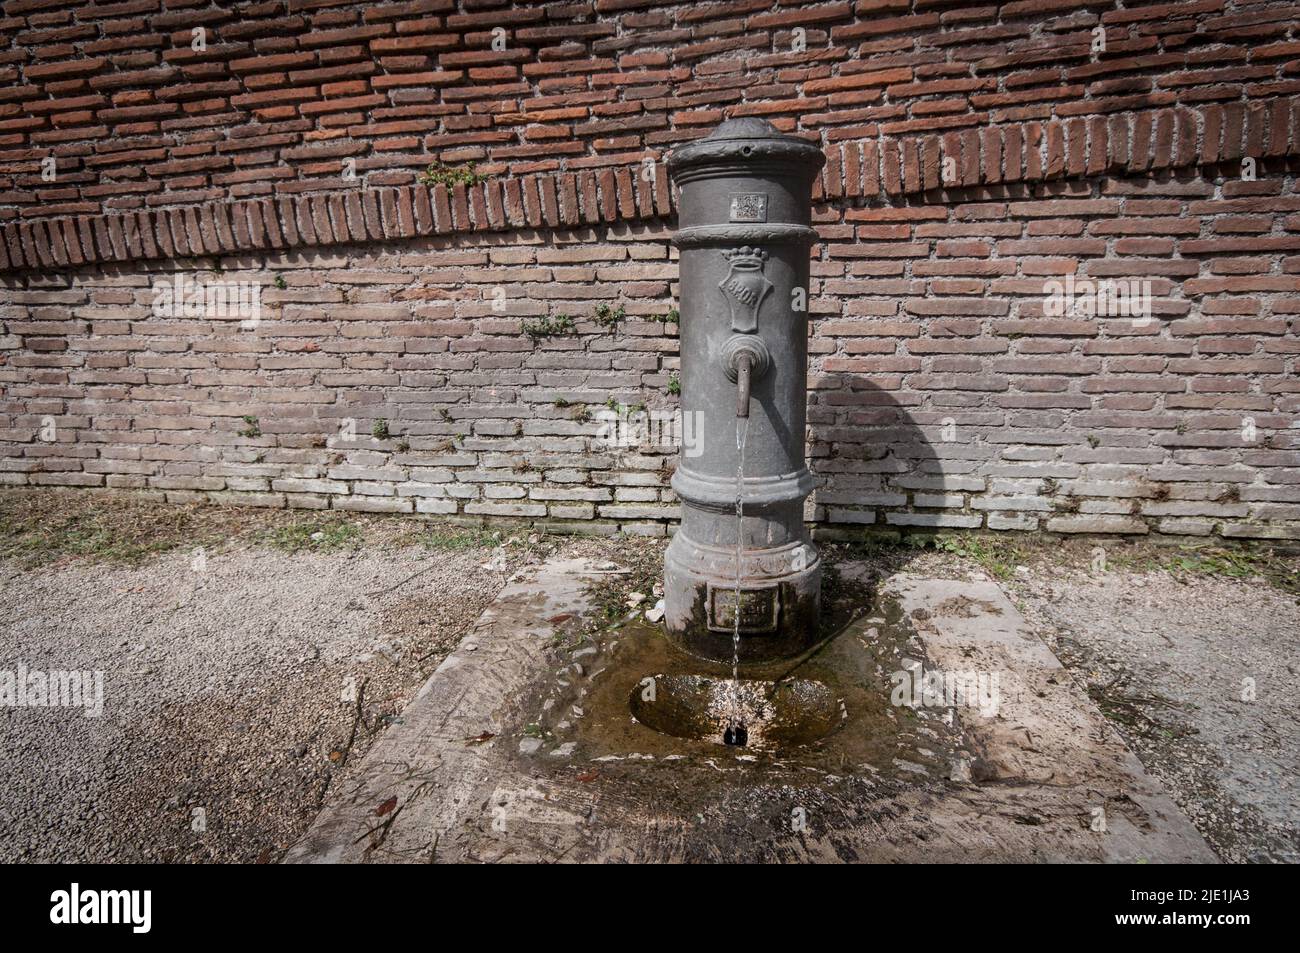 June 24, 2022, Rome, Italy: A fountain in Rome. Lazio on 20 June declared a state of calamity for drought that has hit the central Italian region and many others, especially in the north. Lazio Governor Nicola Zingaretti said the move was aimed at taking measures such as saving water in all activities starting with household consumption. A drought alert has spread from the Po valley, where waters are three quarters down amid the worst drought in 70 years, to central rivers like the Arno, the Aniene and the Tiber, which have half the water they normally do at this time of the year, officials sa Stock Photo